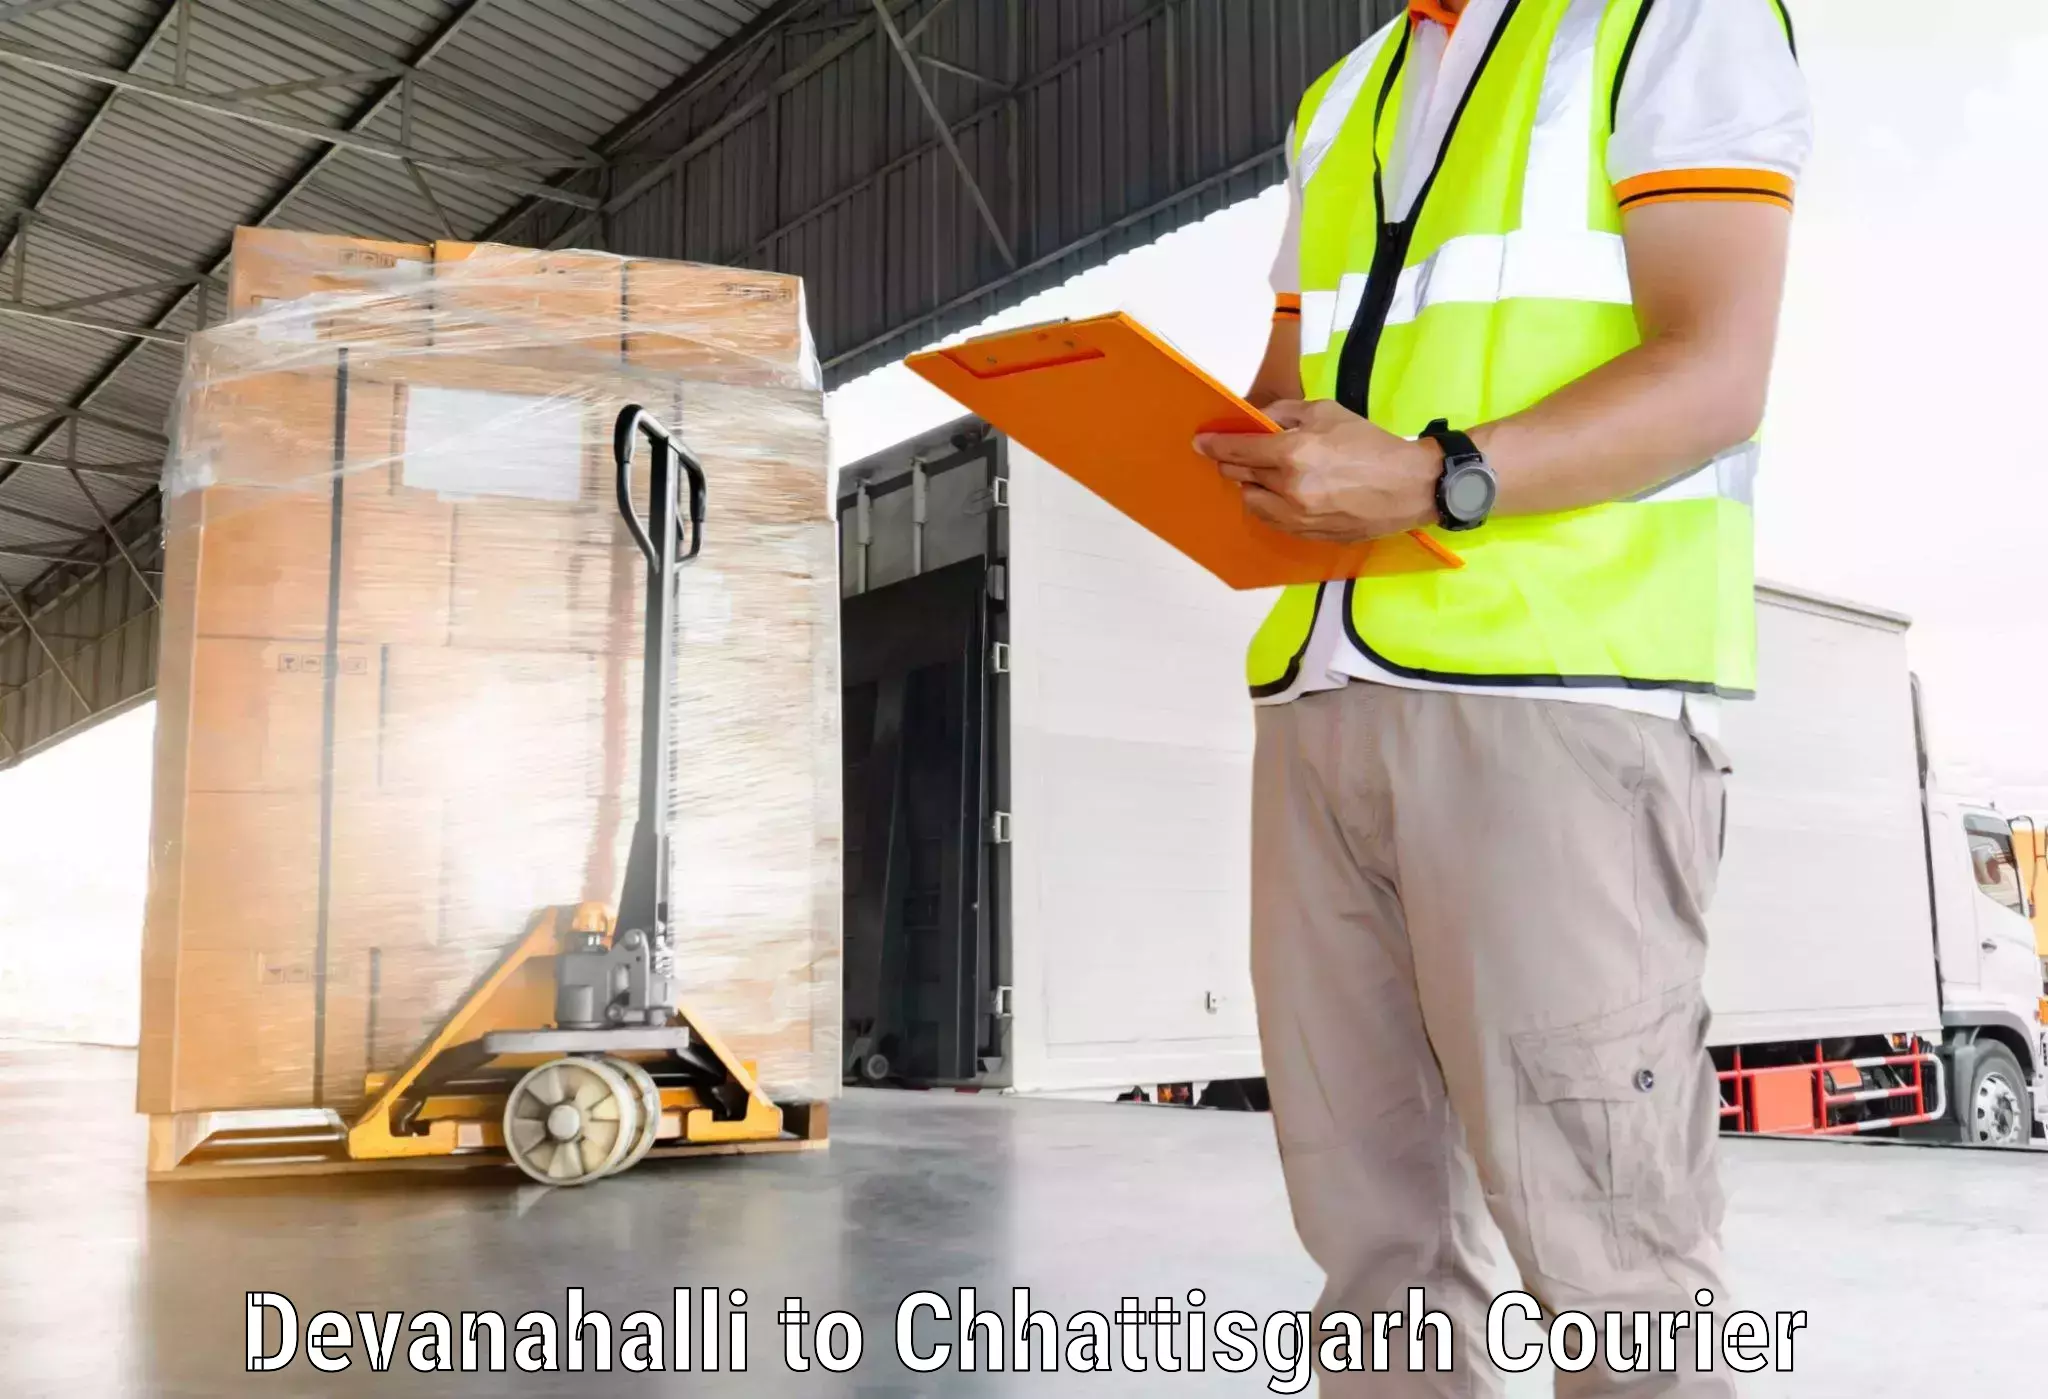 Global shipping networks Devanahalli to Basna